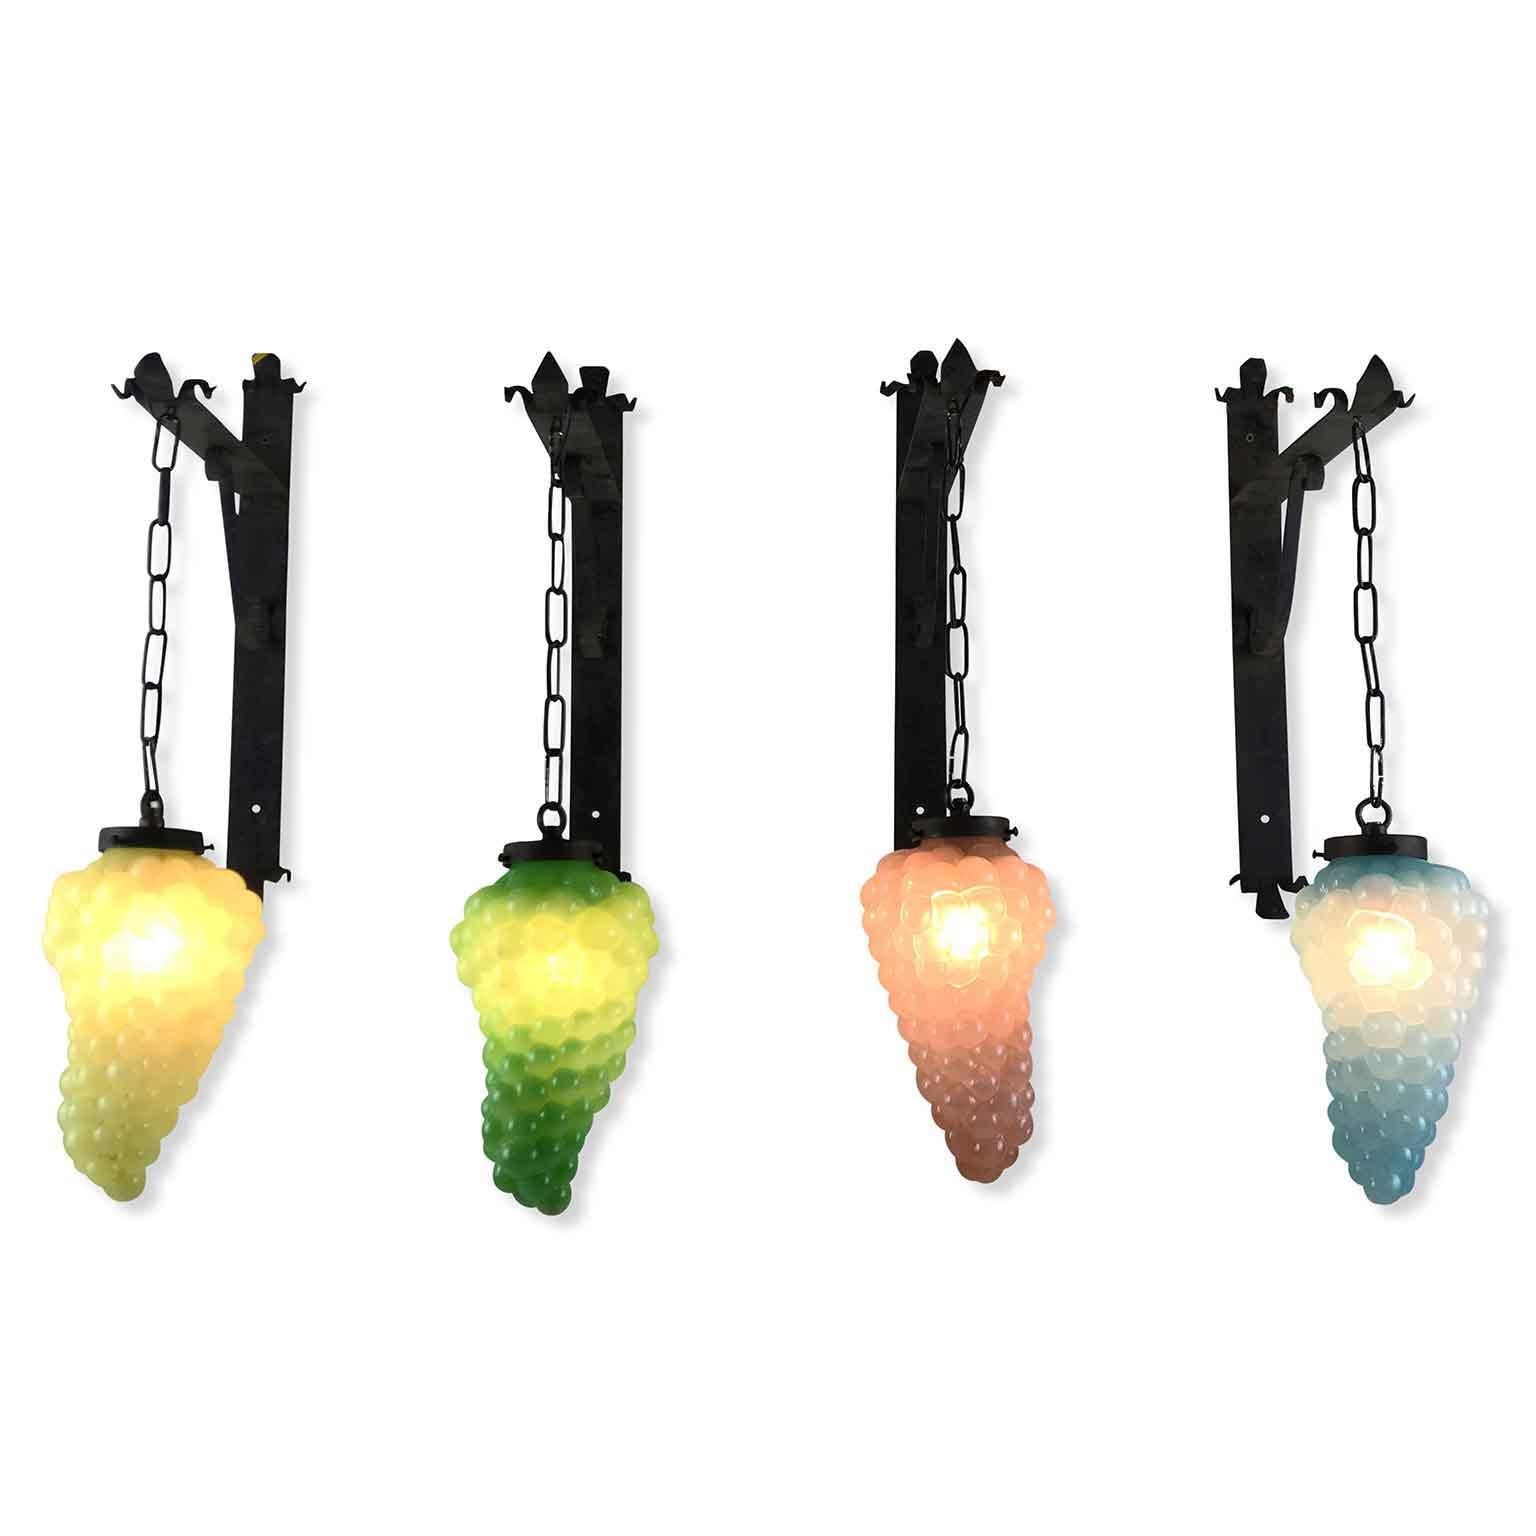 European Set of Four Italian Glass Grape Sconces with Wrought Iron Brackets 1960s For Sale